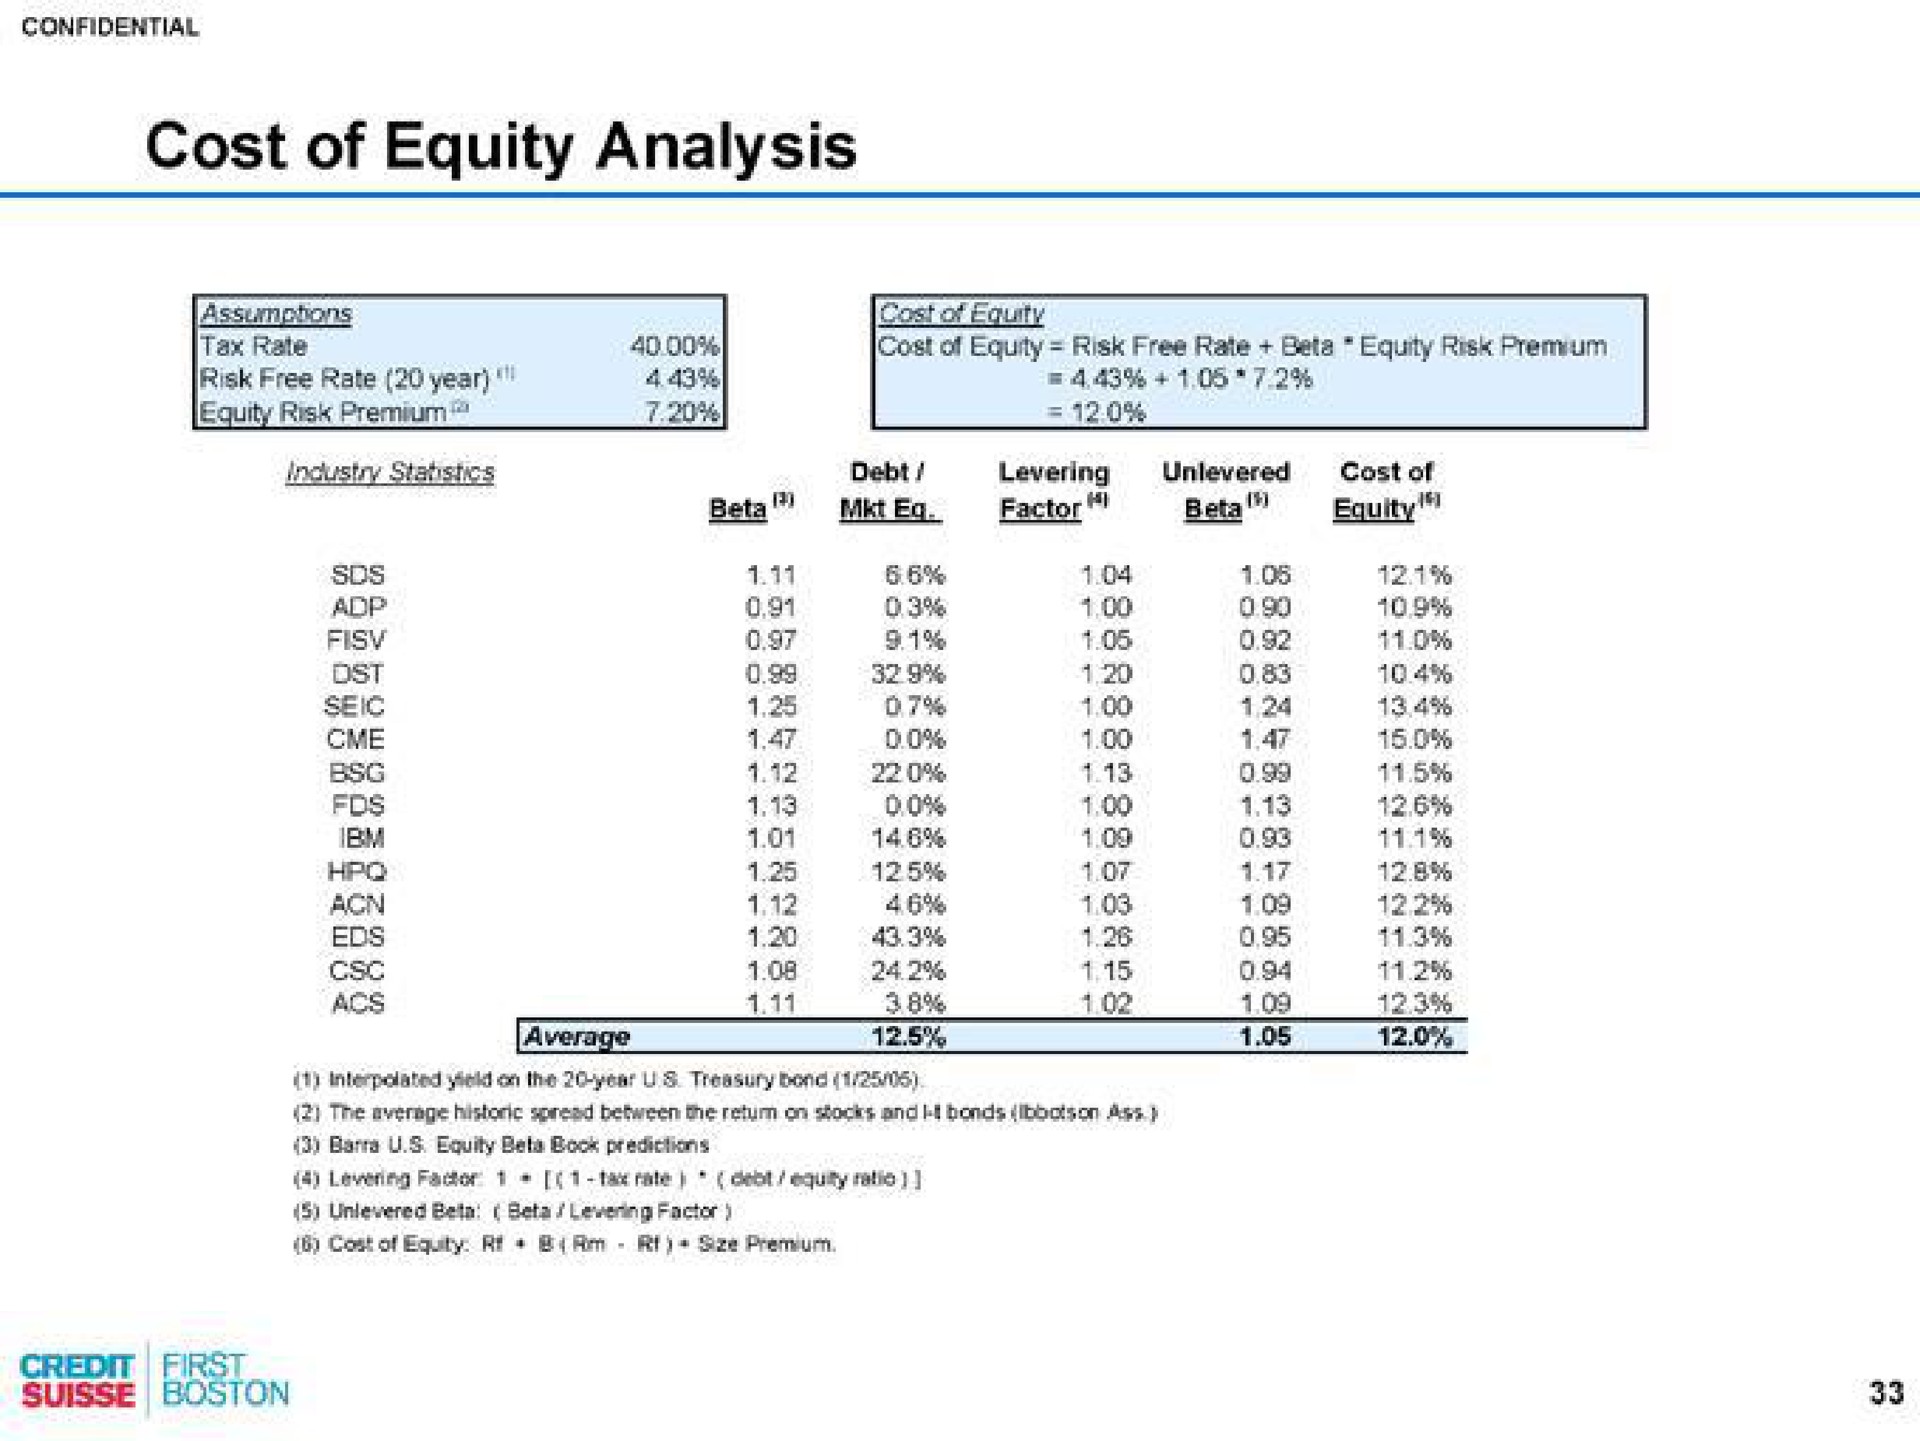 cost of equity analysis beta factor beta equity | Credit Suisse